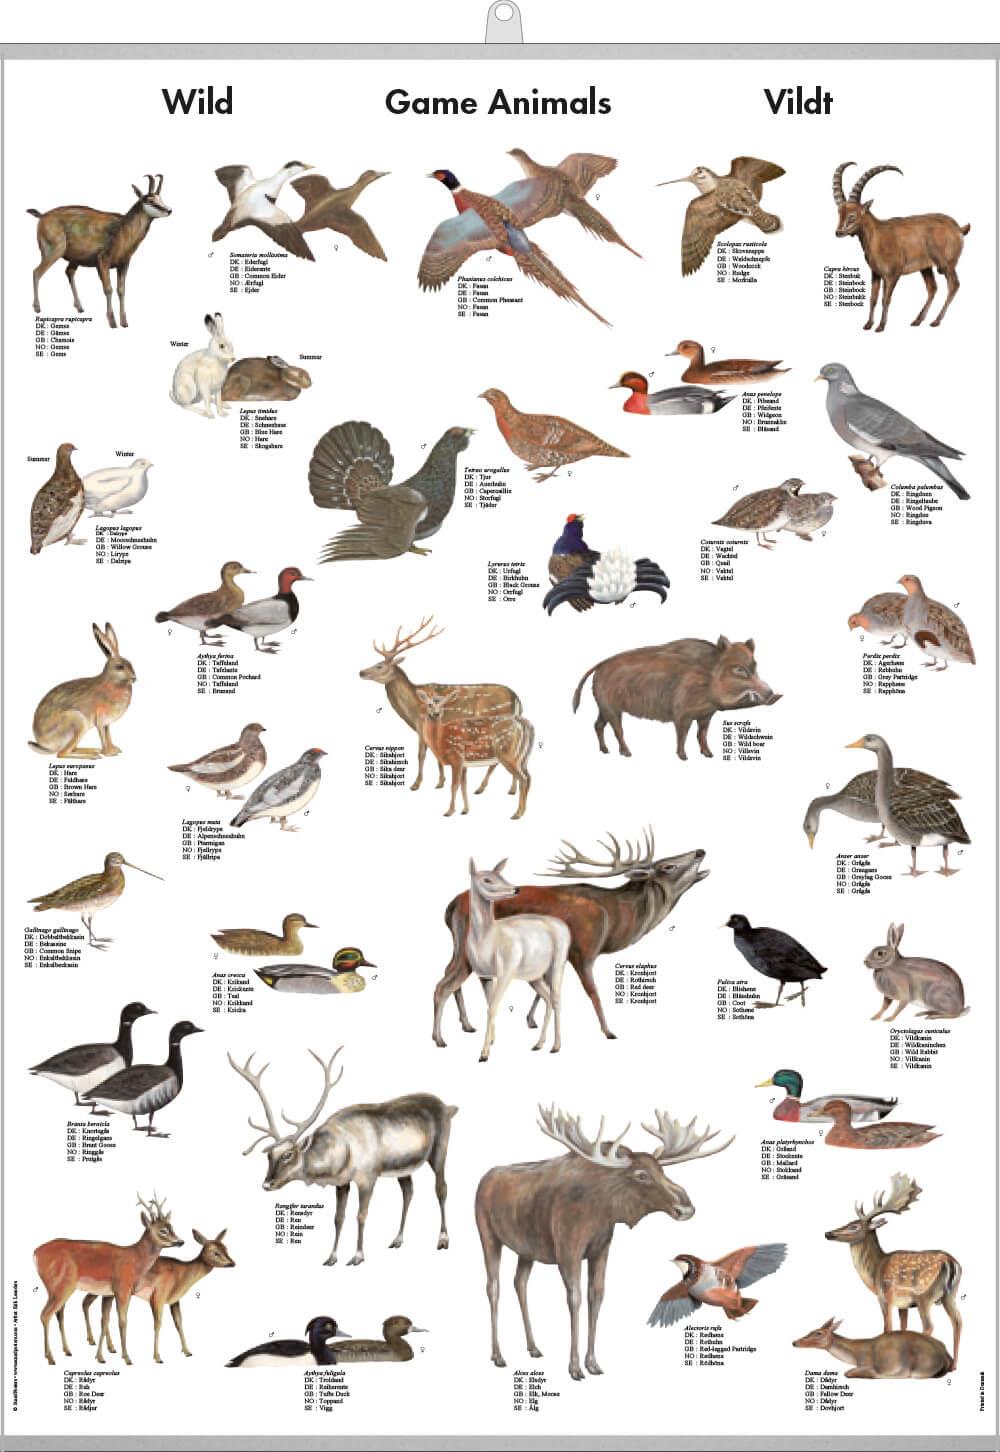 Buy Game Animals Mini-Poster online here | Linaa